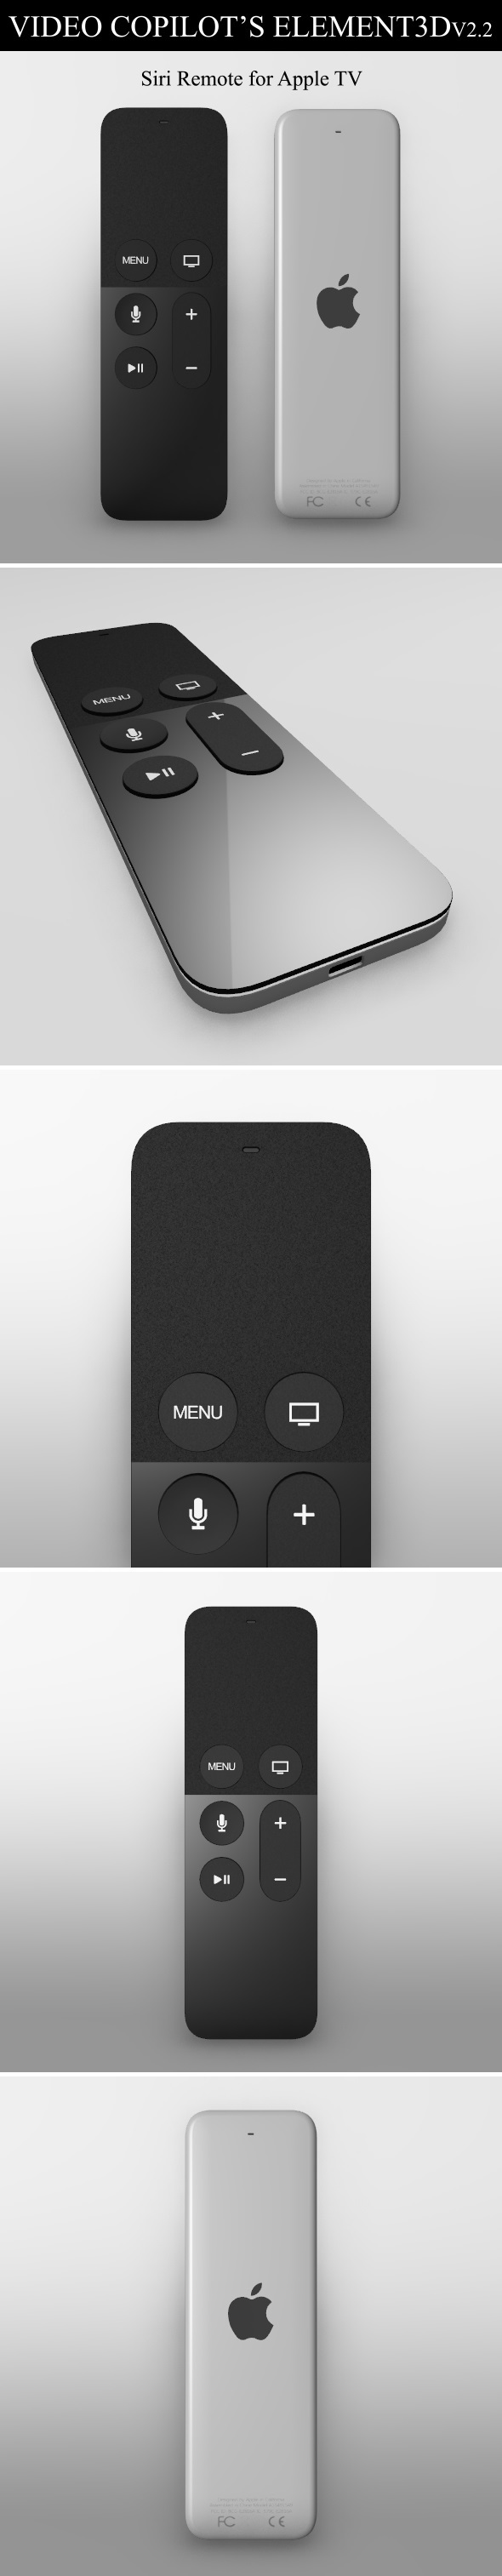 Element3D - Siri Remote for Apple TV